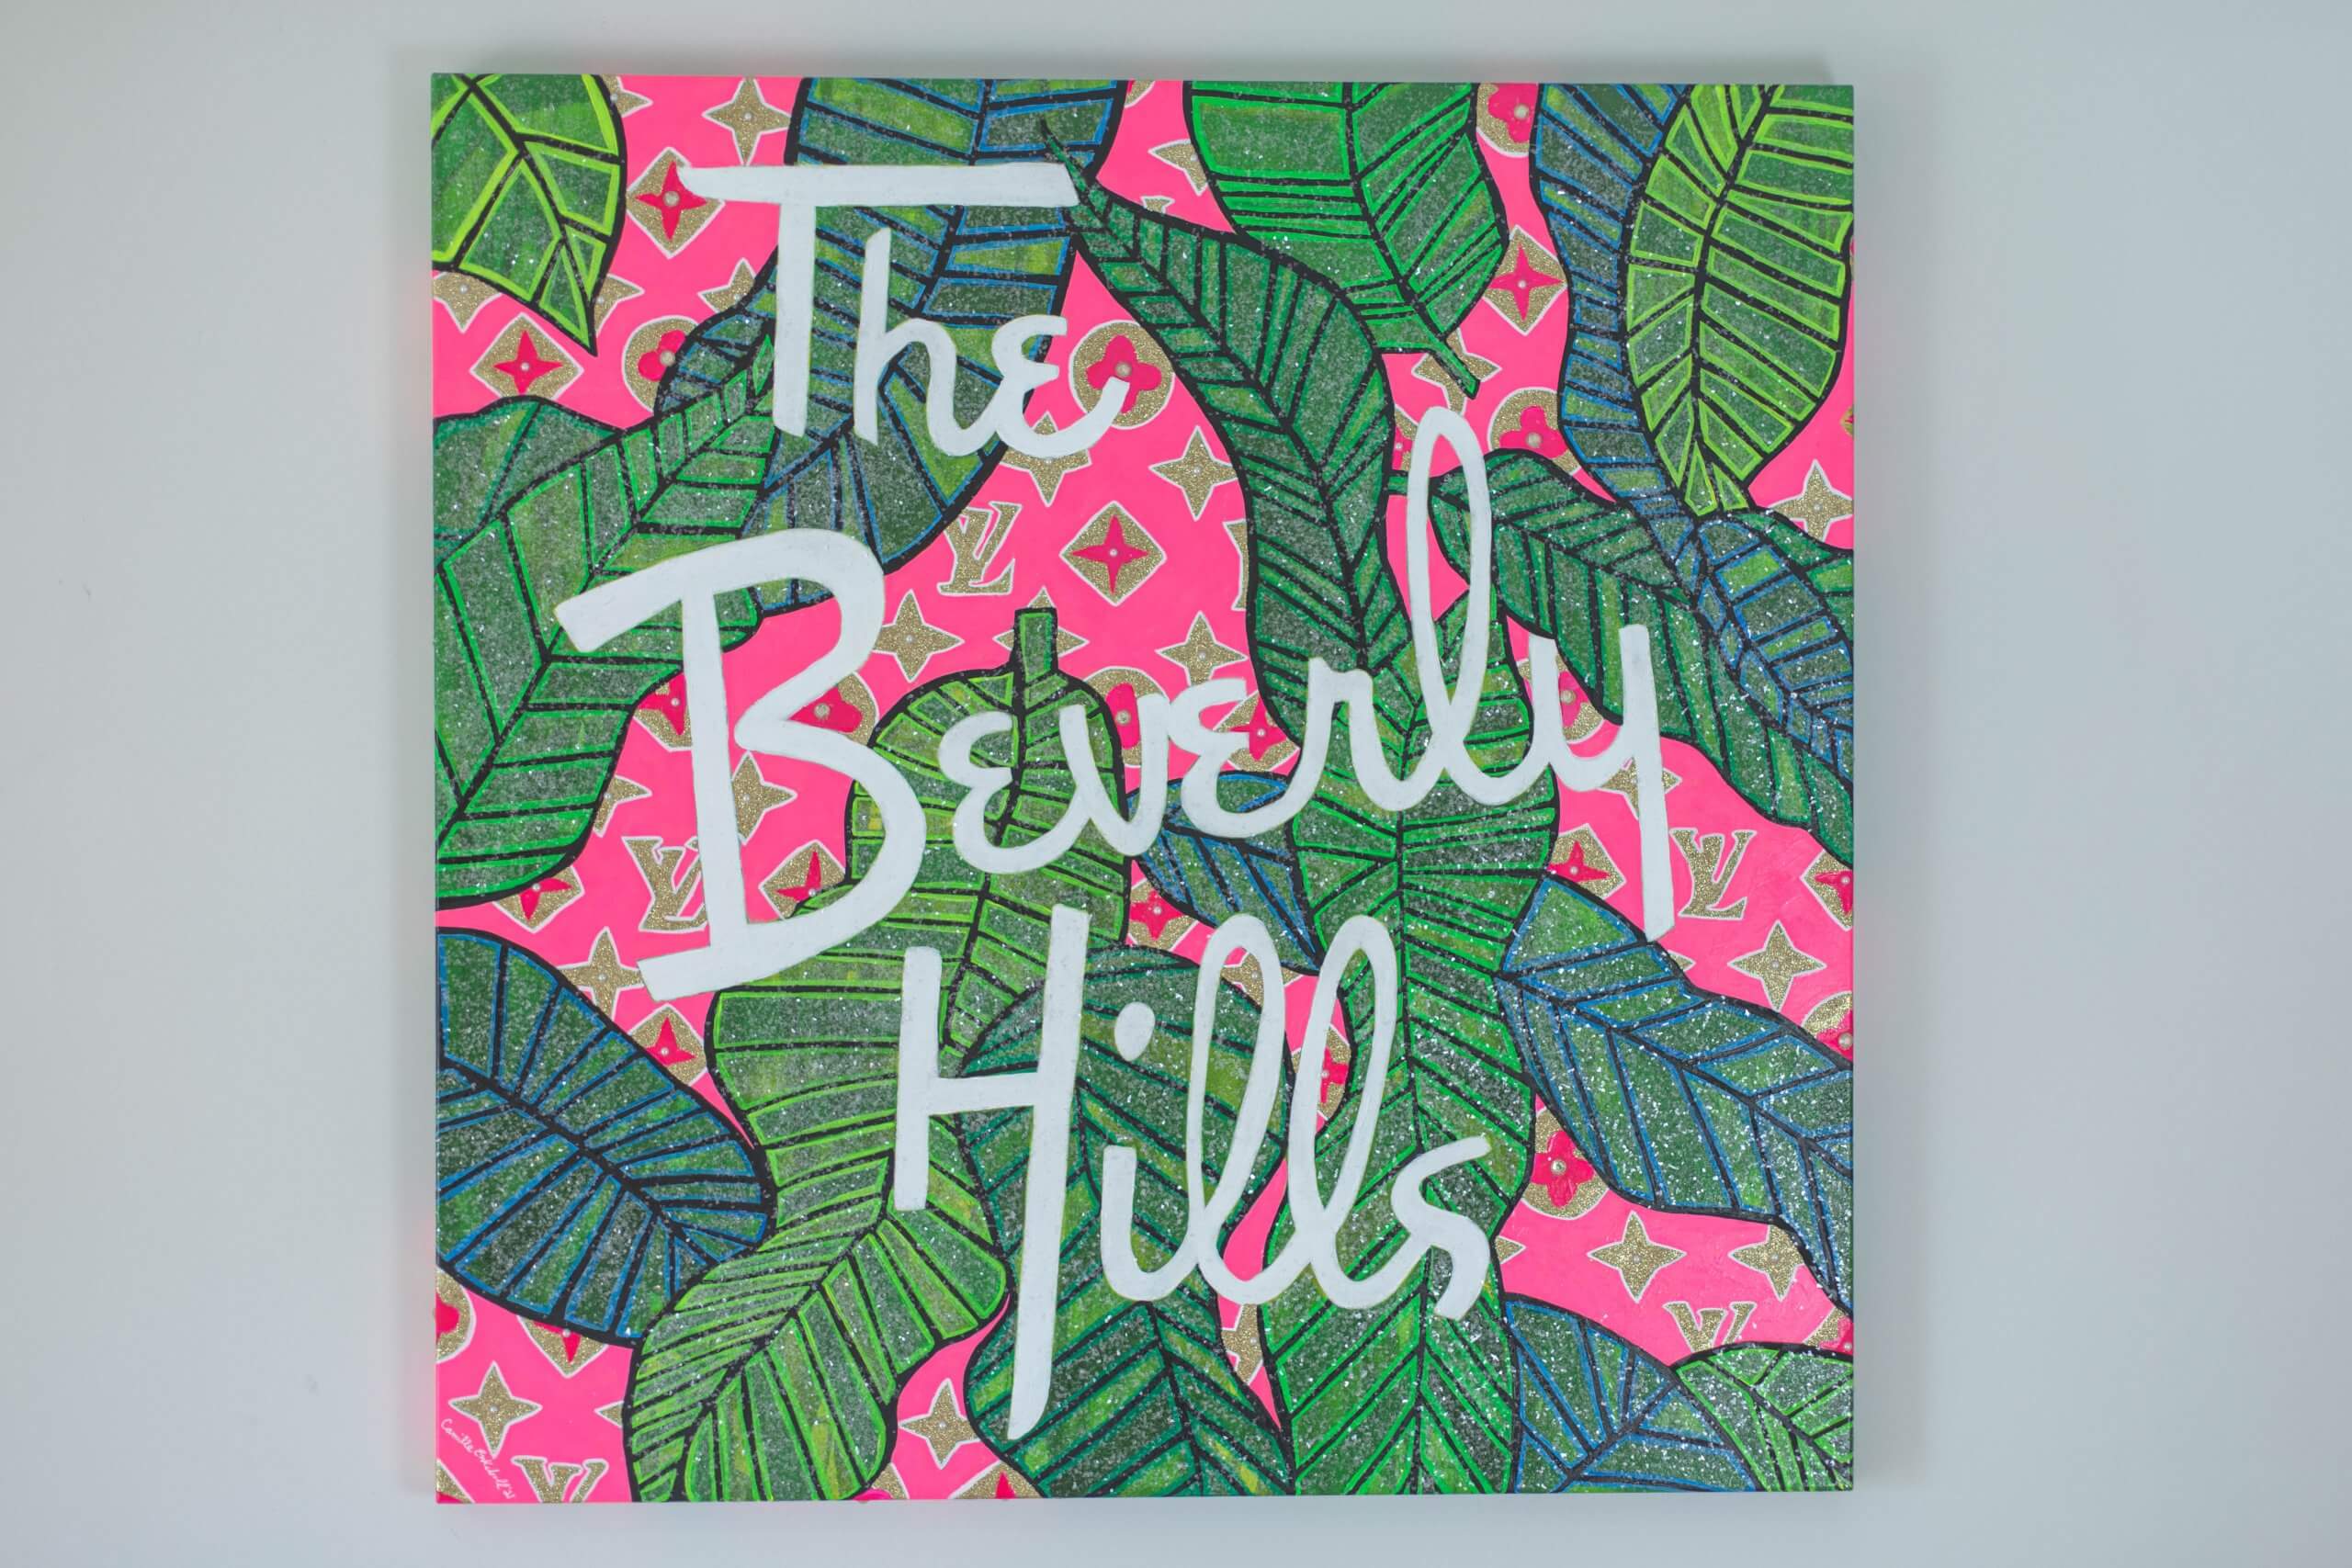 THE BEVERLY HILLS 2.0